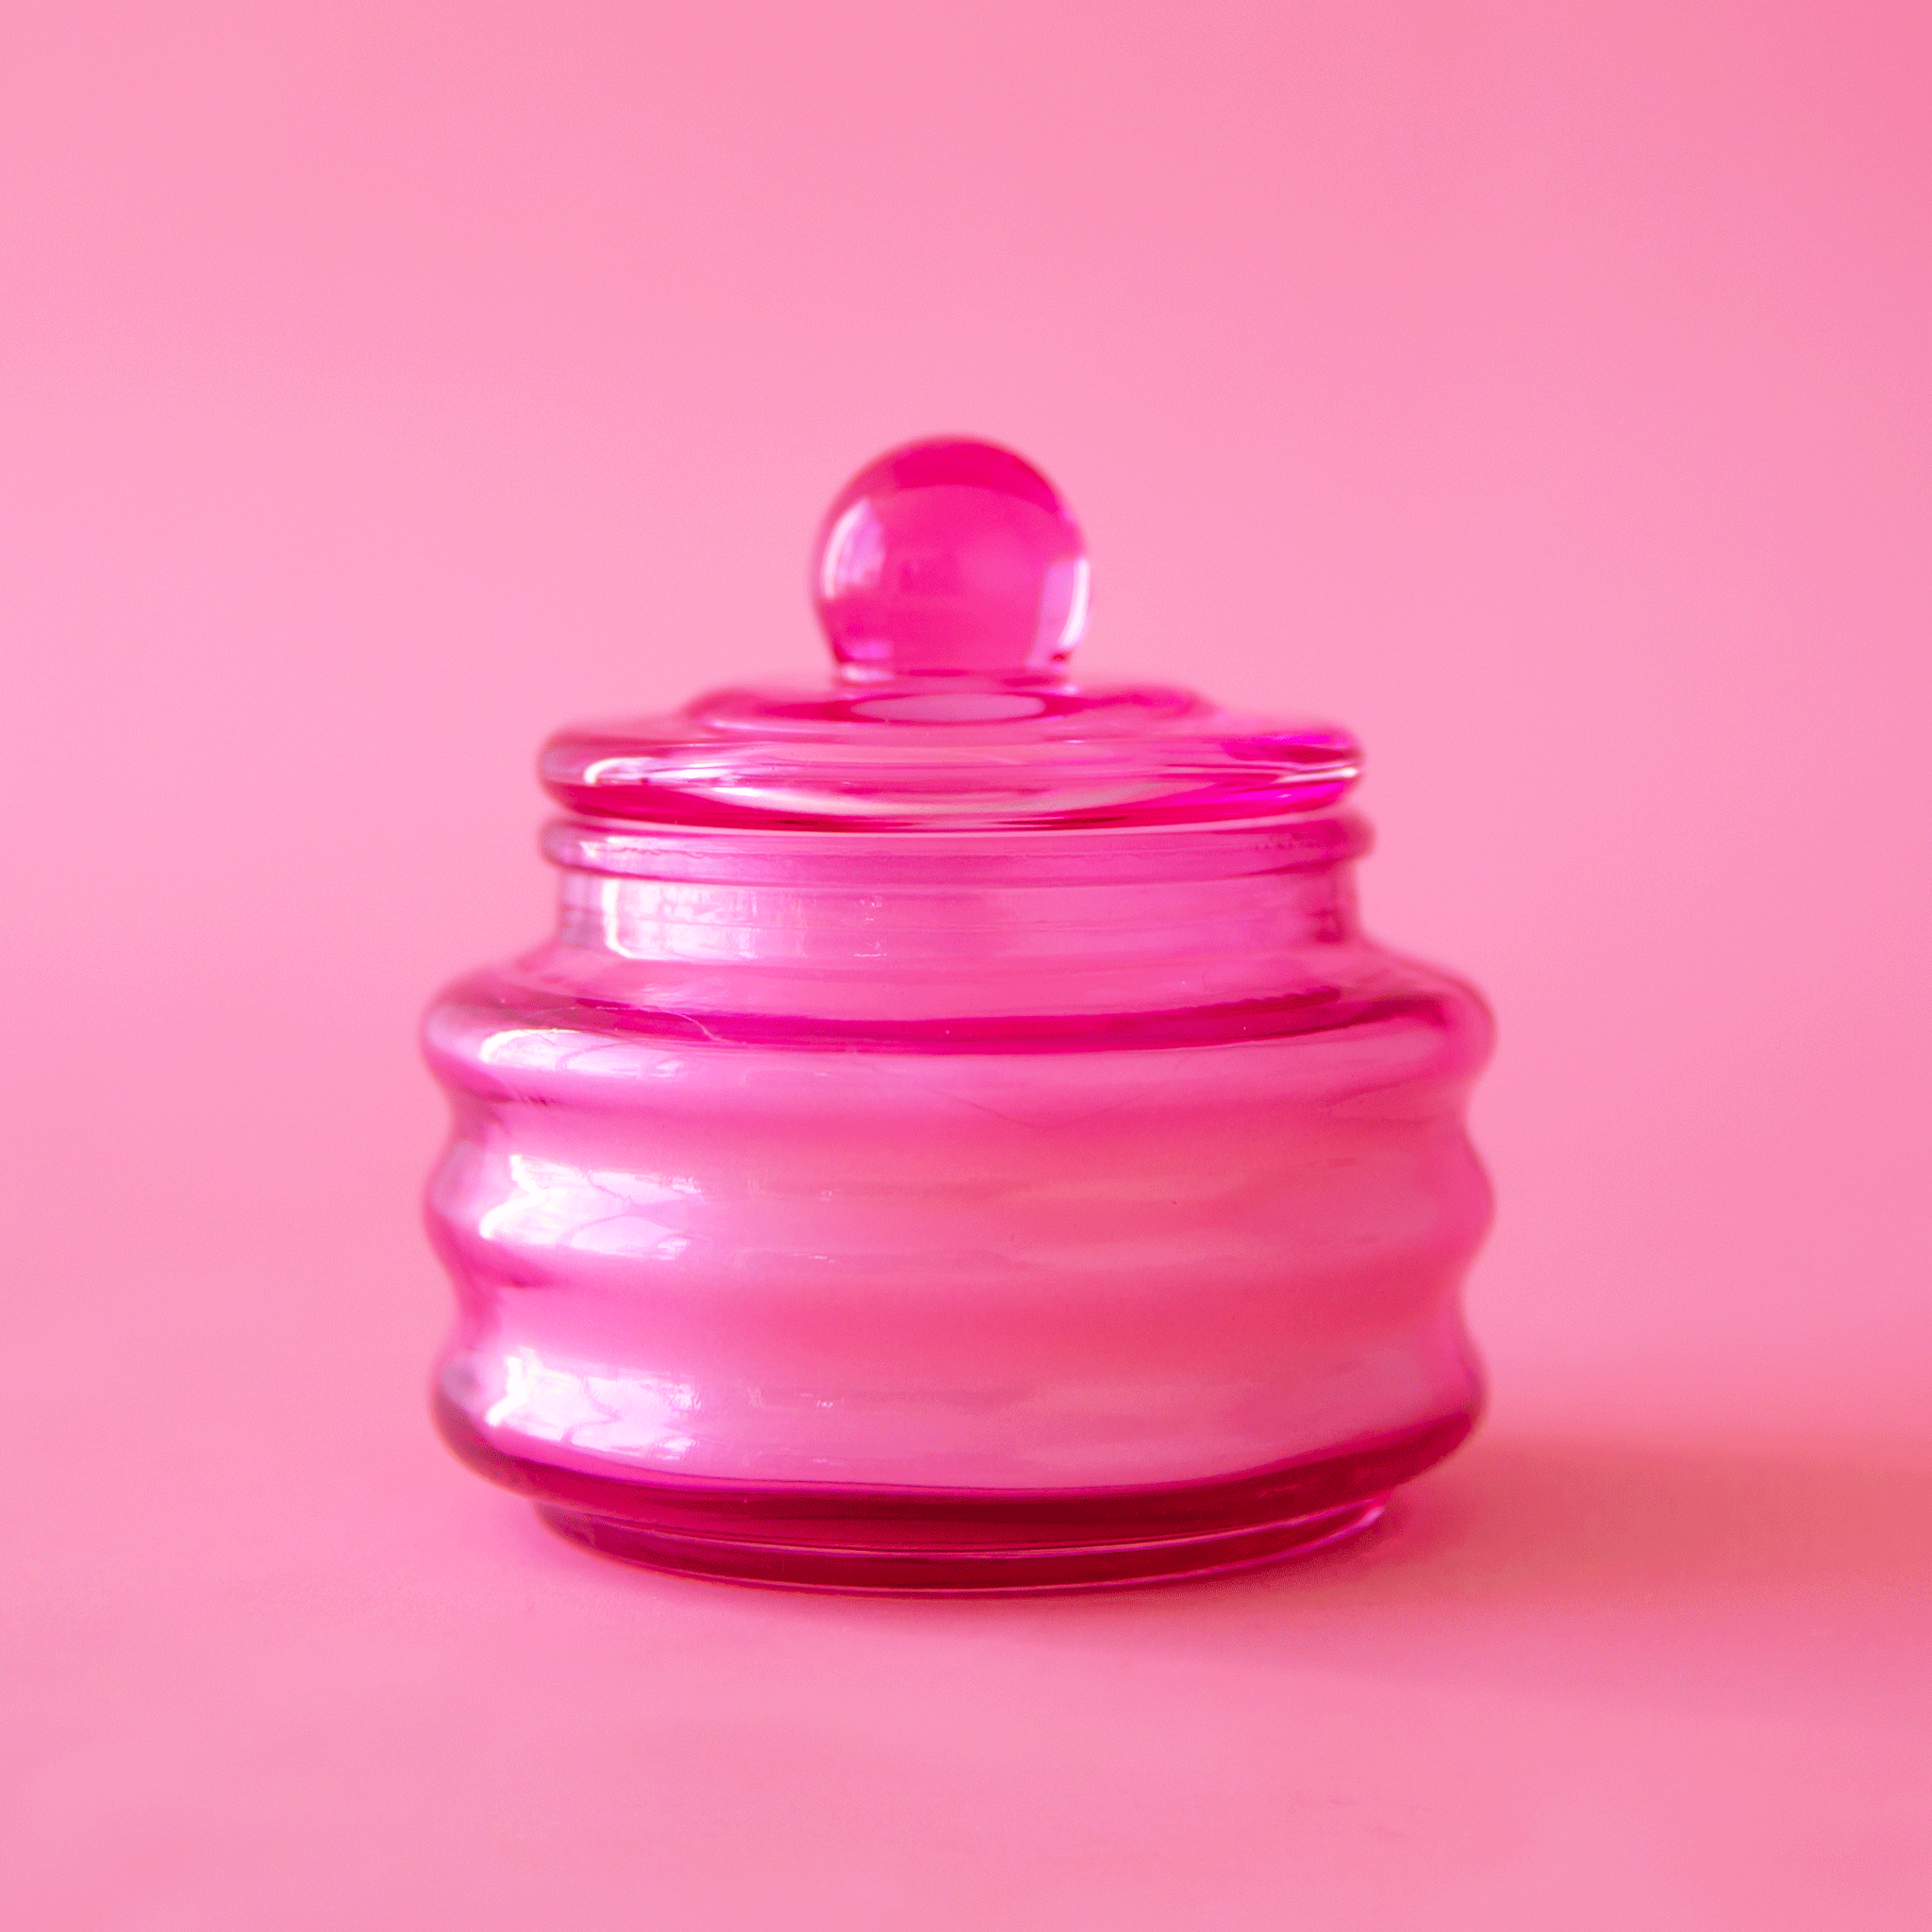 On a pink background is a glass pink jarred candle with a coordinating lid. 